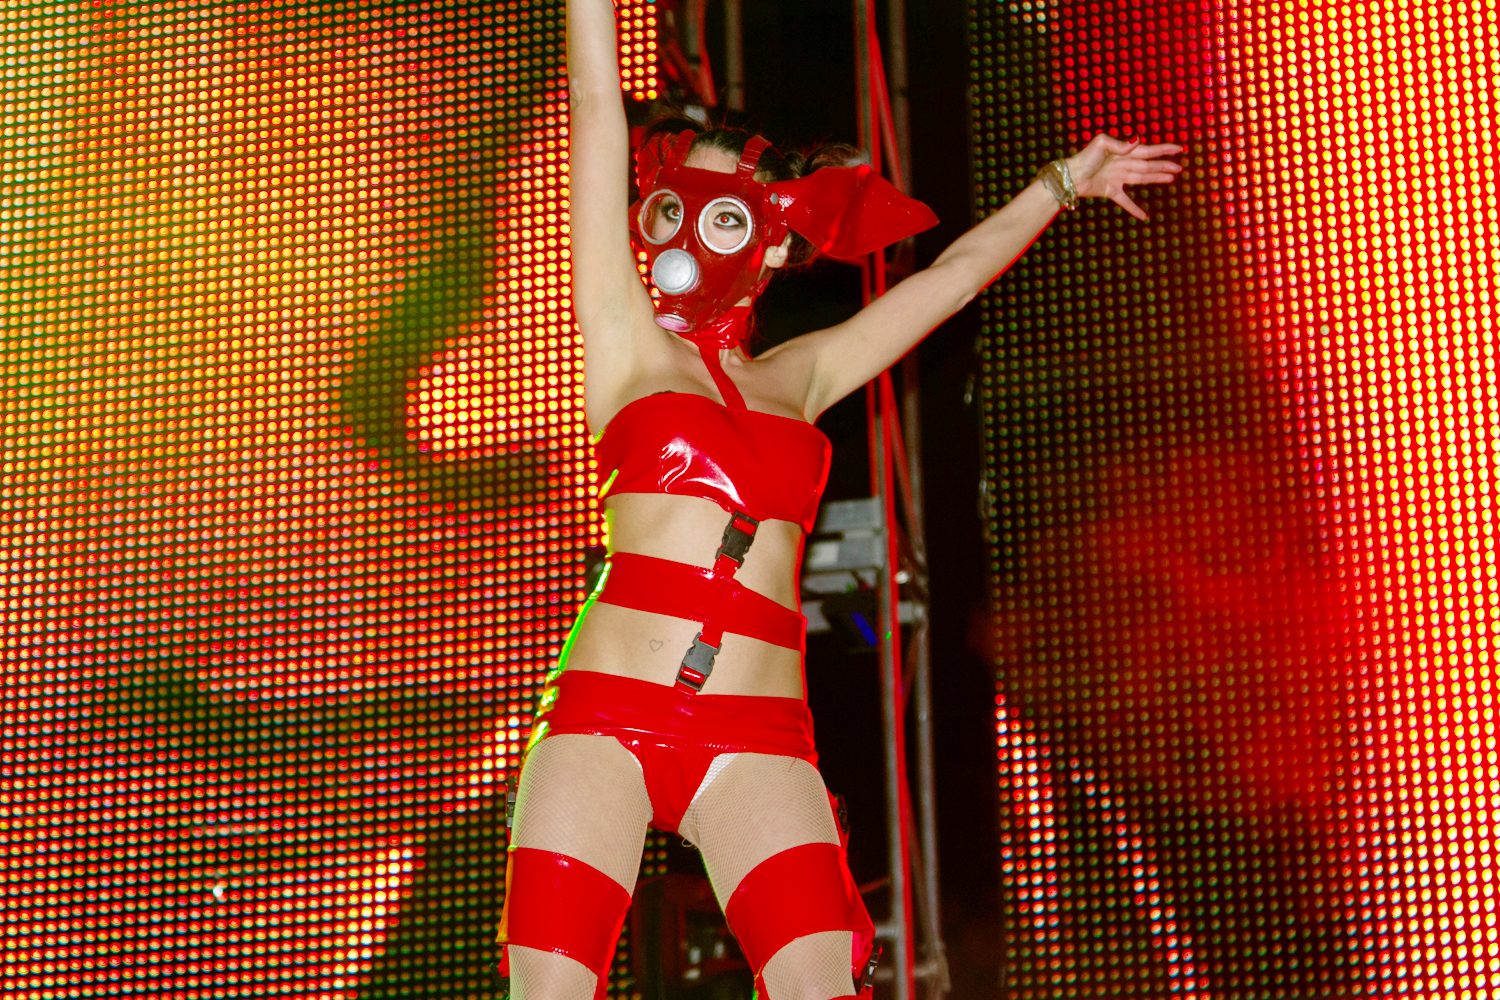 Electric Daisy Carnival NY Day 3 at MetLife Stadium on May 20, 2012